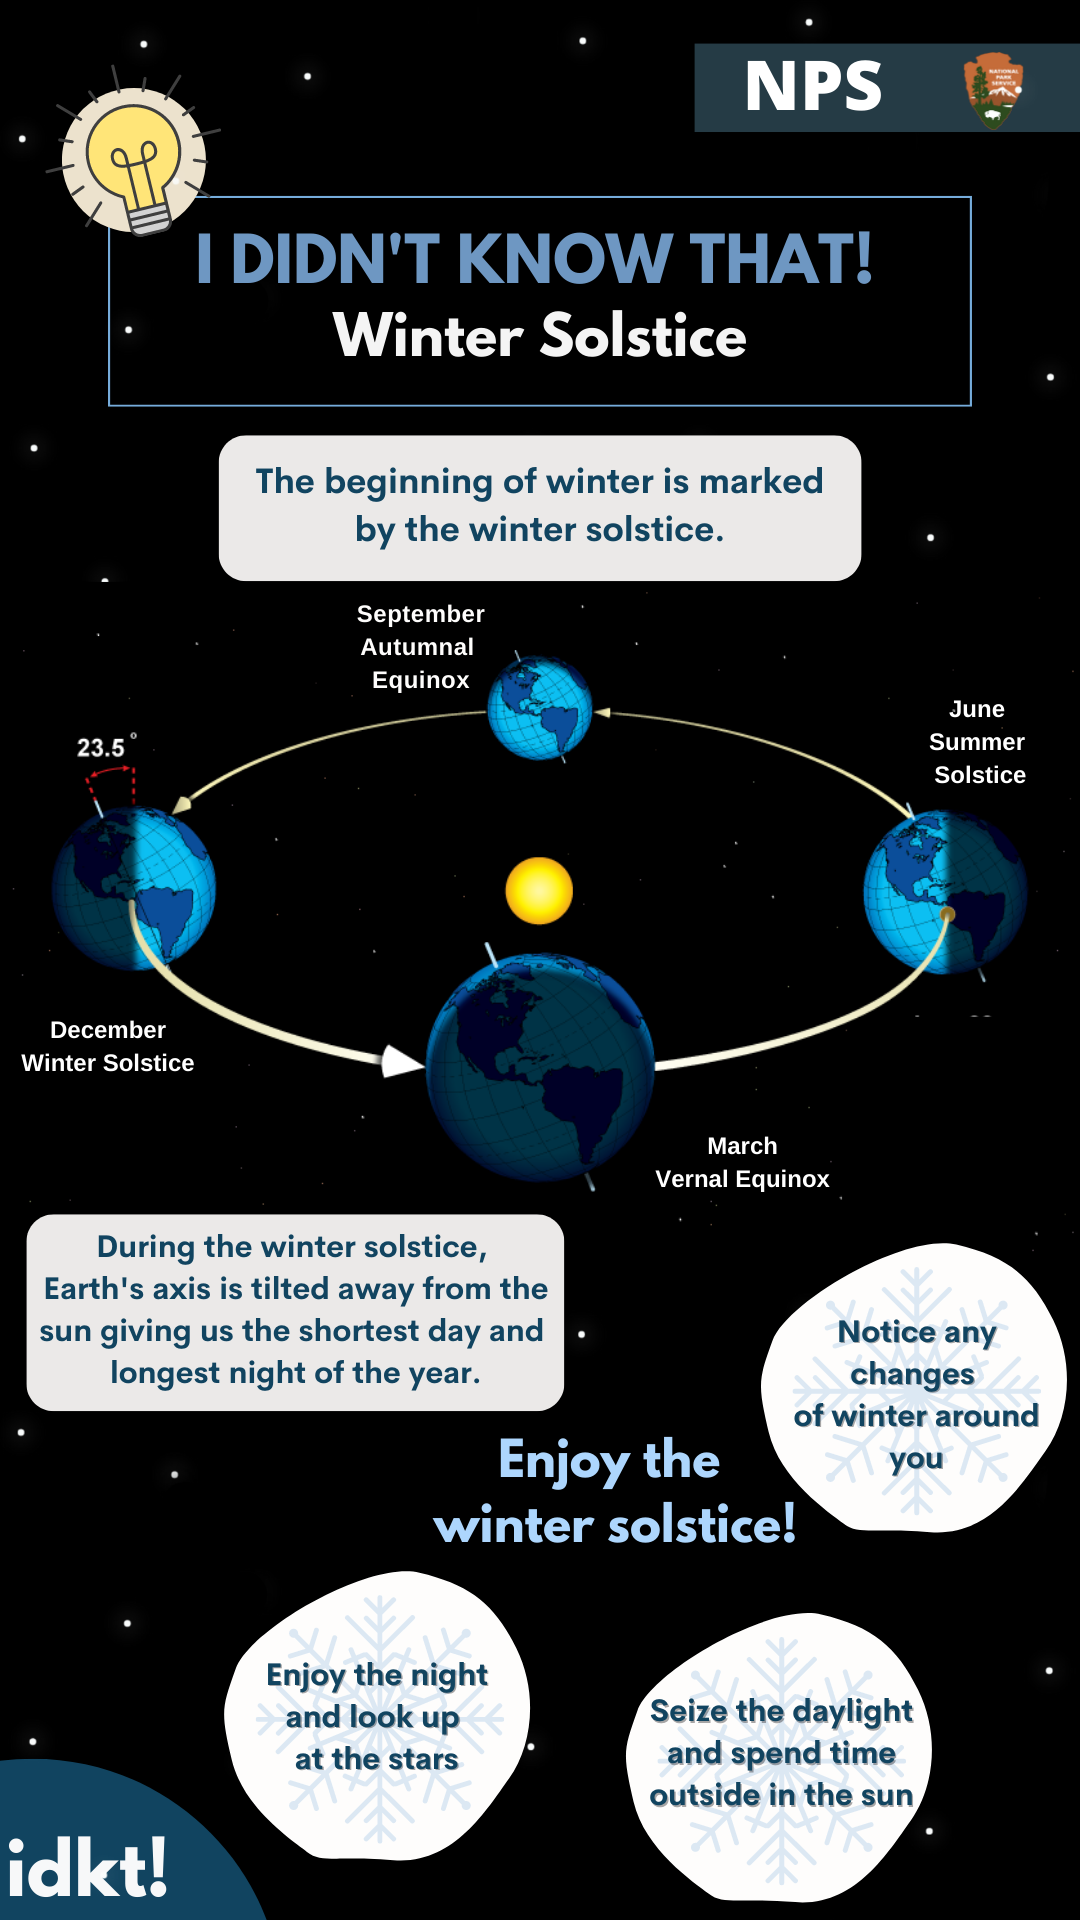 an infographic describing the winter solstice. Full alt text available below image